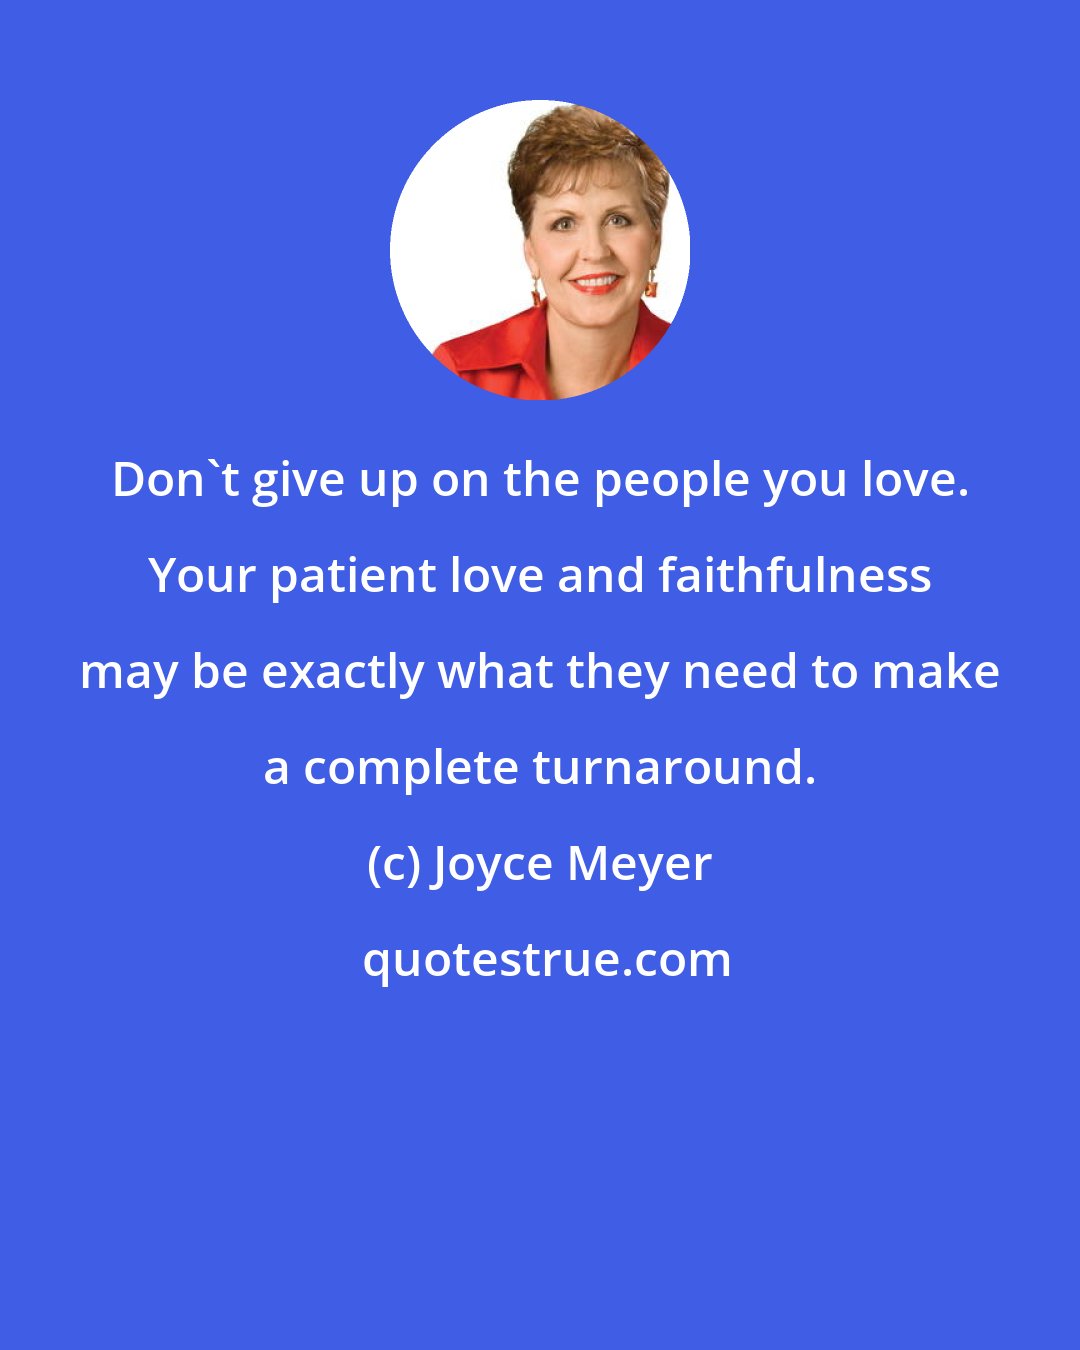 Joyce Meyer: Don't give up on the people you love. Your patient love and faithfulness may be exactly what they need to make a complete turnaround.